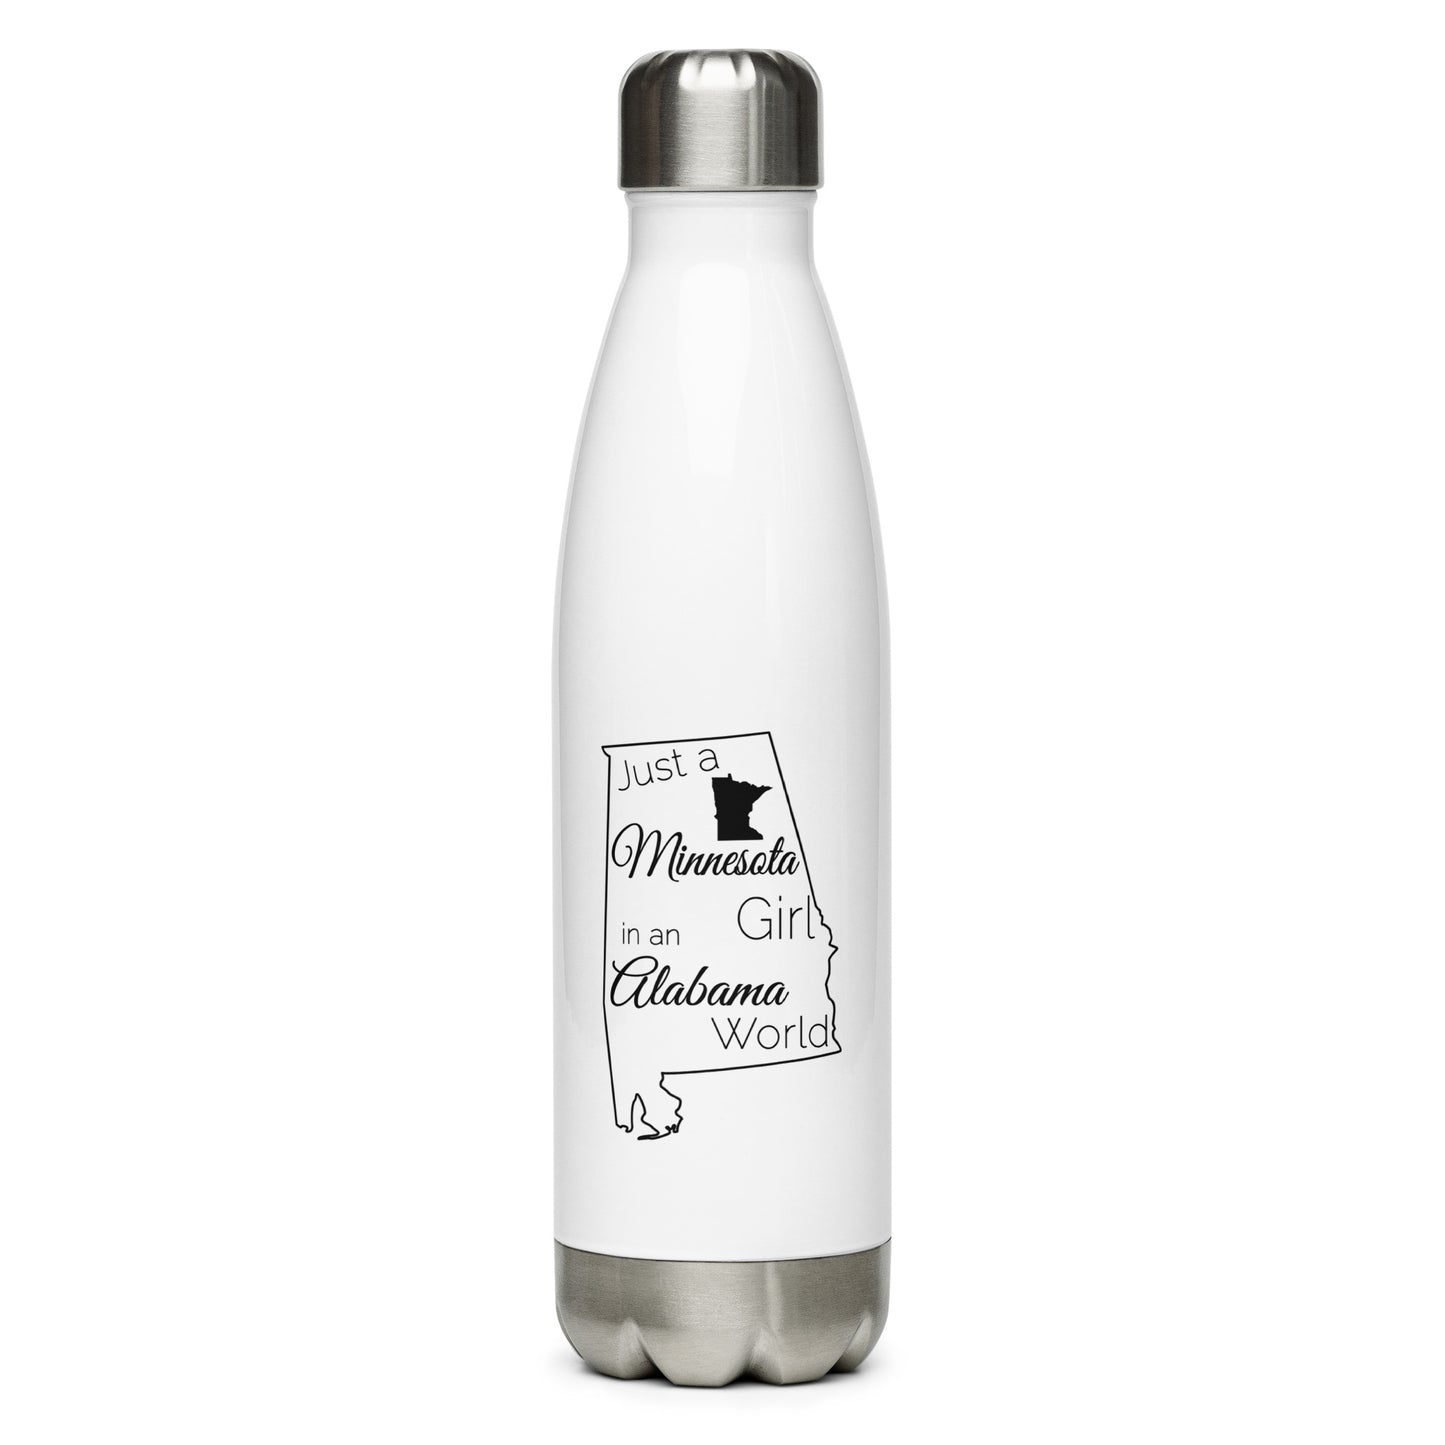 Just a Minnesota Girl in an Alabama World Stainless Steel Water Bottle